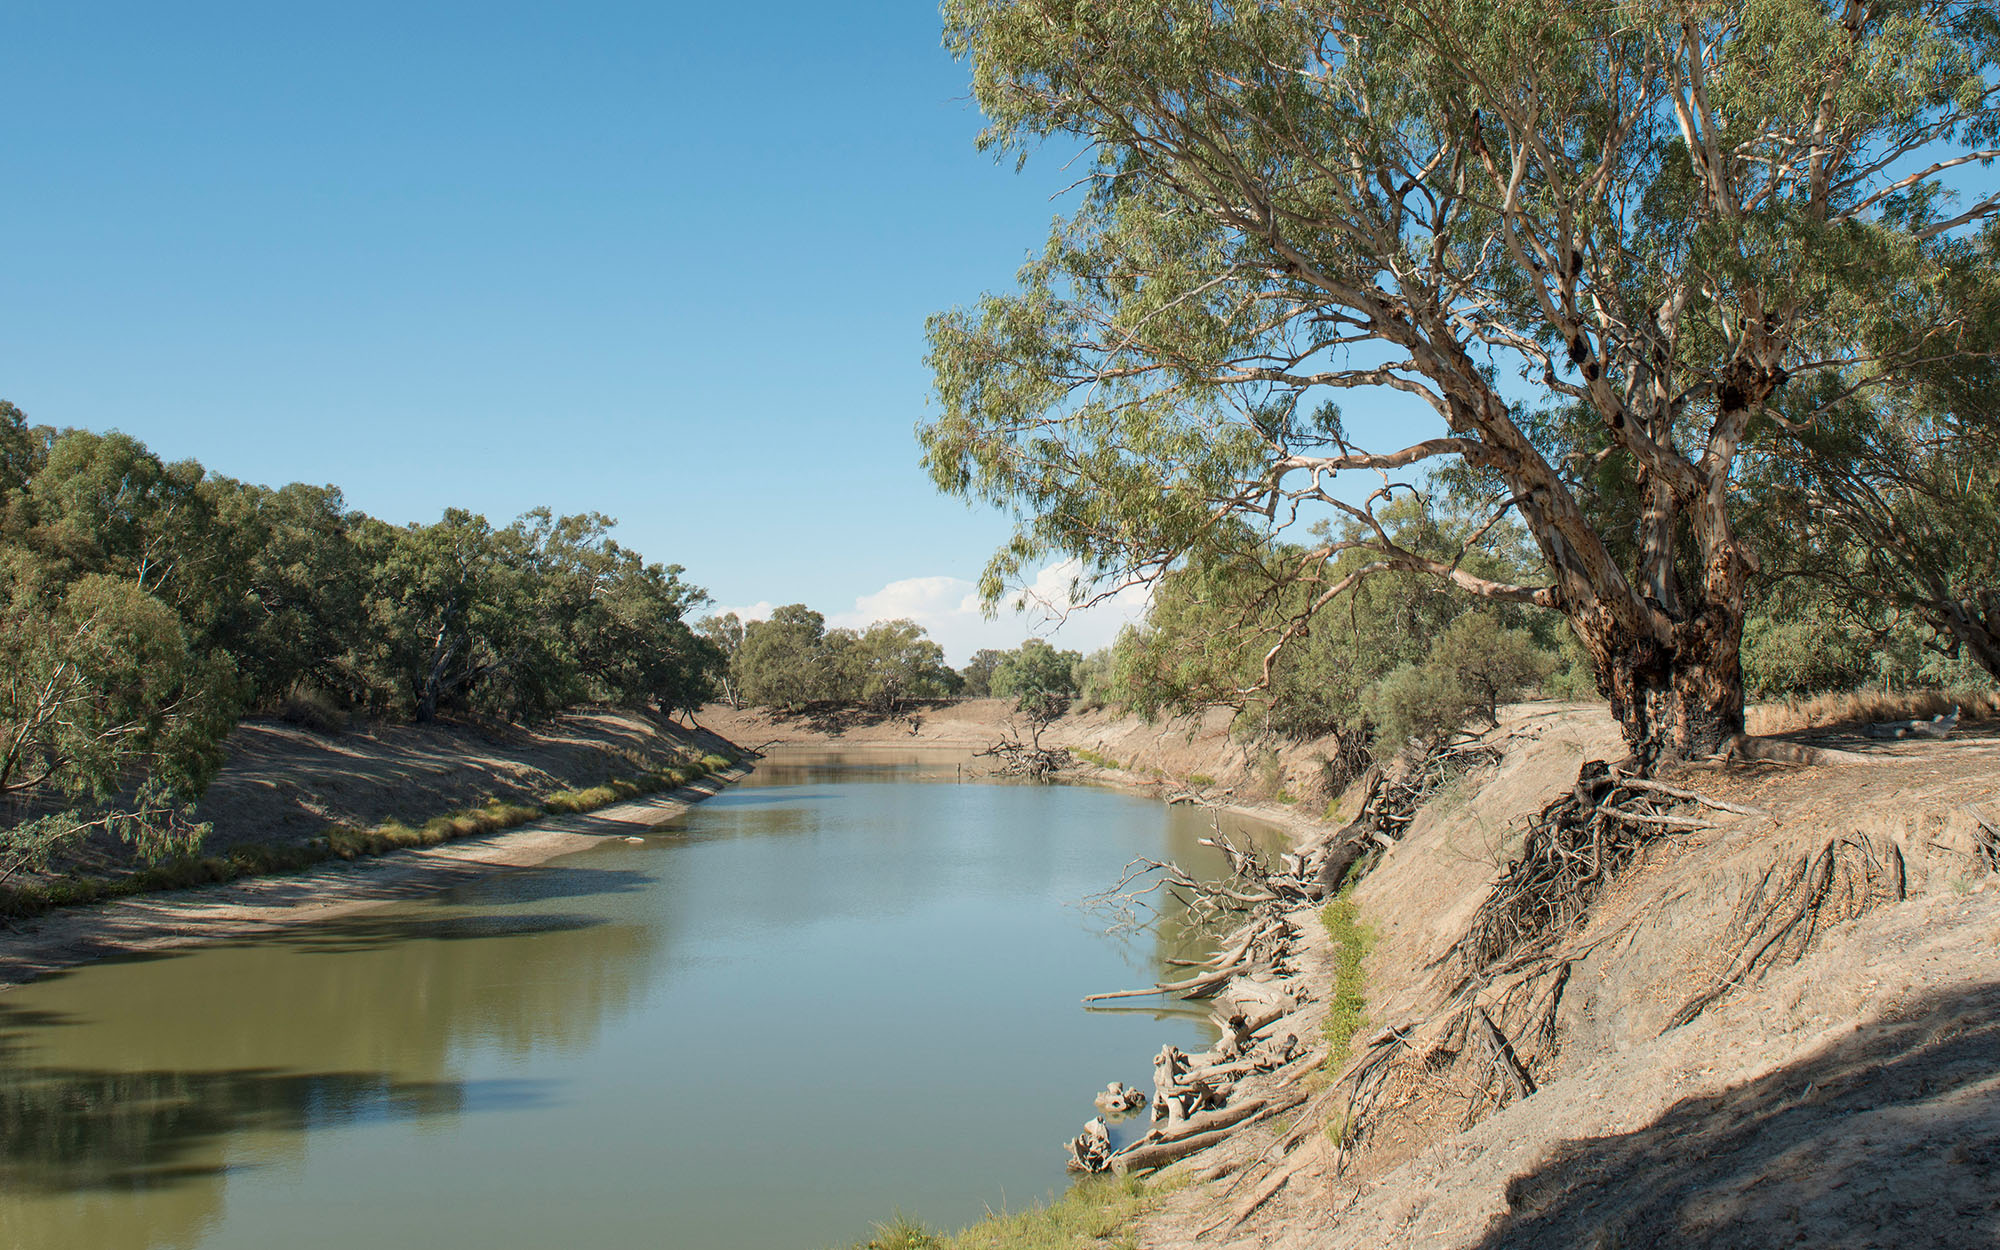 Darling River near Wilcannia in New South Wales.